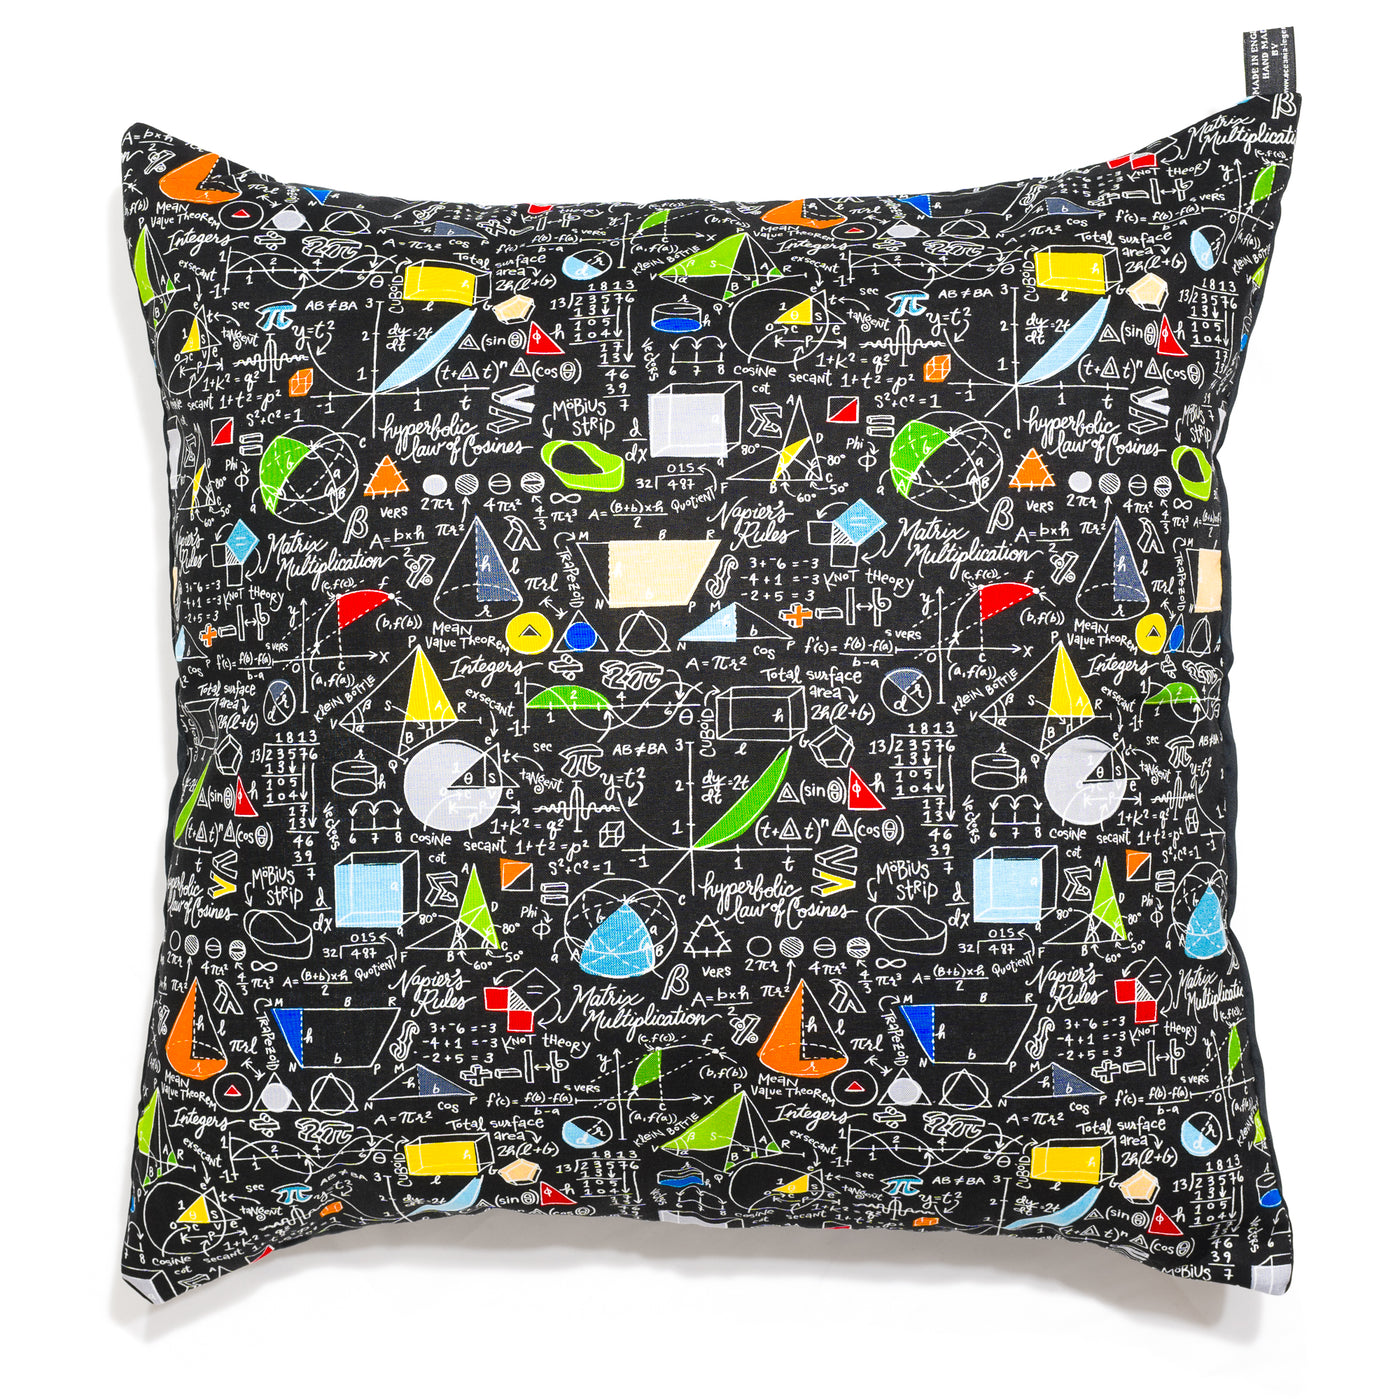 Cushion Covers Fits an 18 x 18 Scatter Cushion